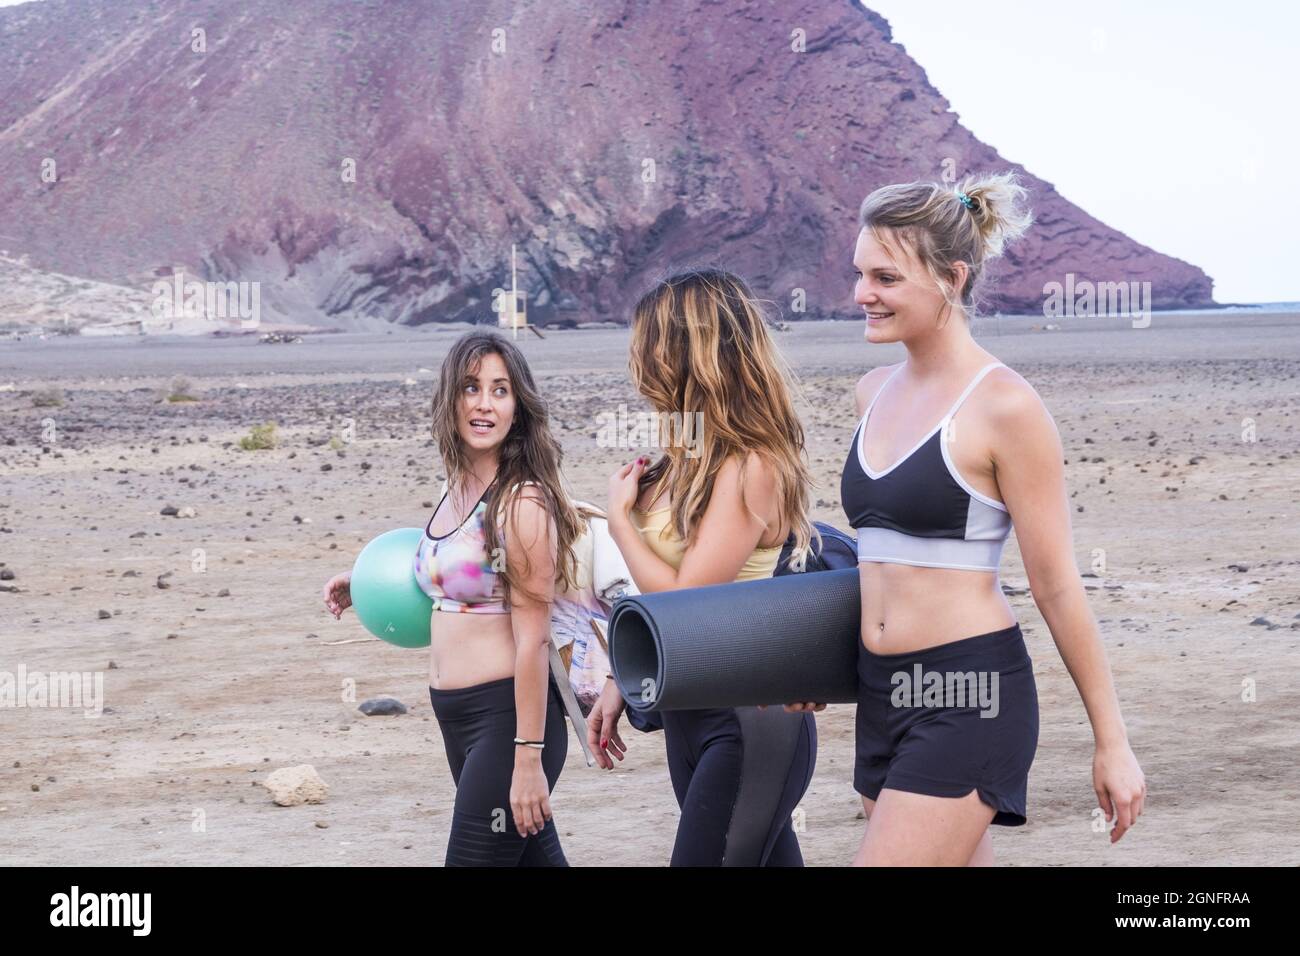 Three female friends in sports clothing with exercise equipments walking on beach. Young women using yoga mat and ball for workout at beach during vac Stock Photo